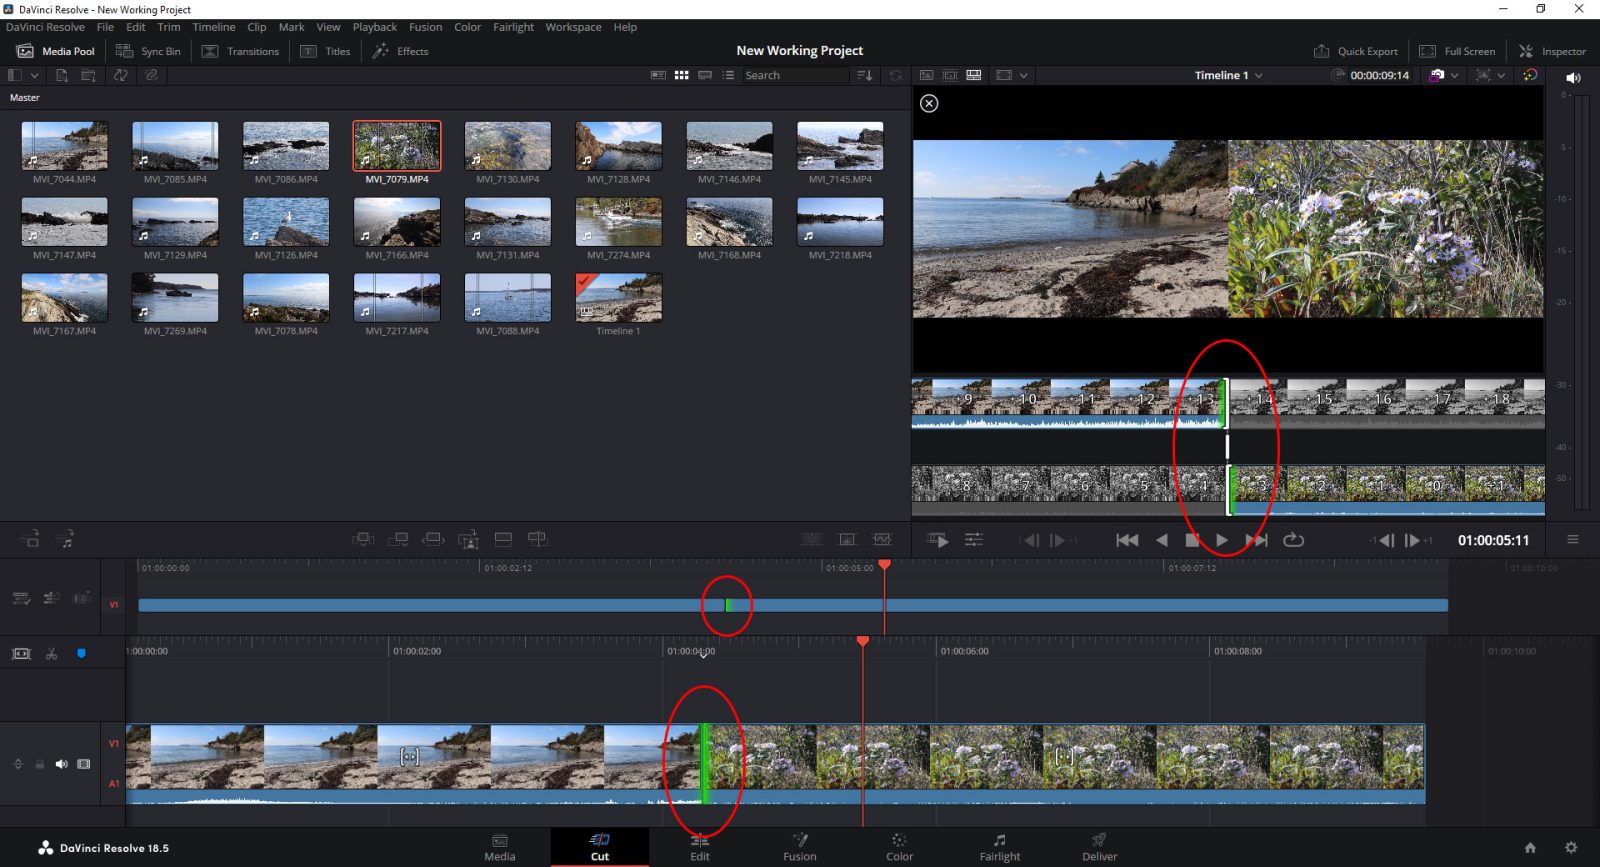 Ripple Editing Positions in Resolve